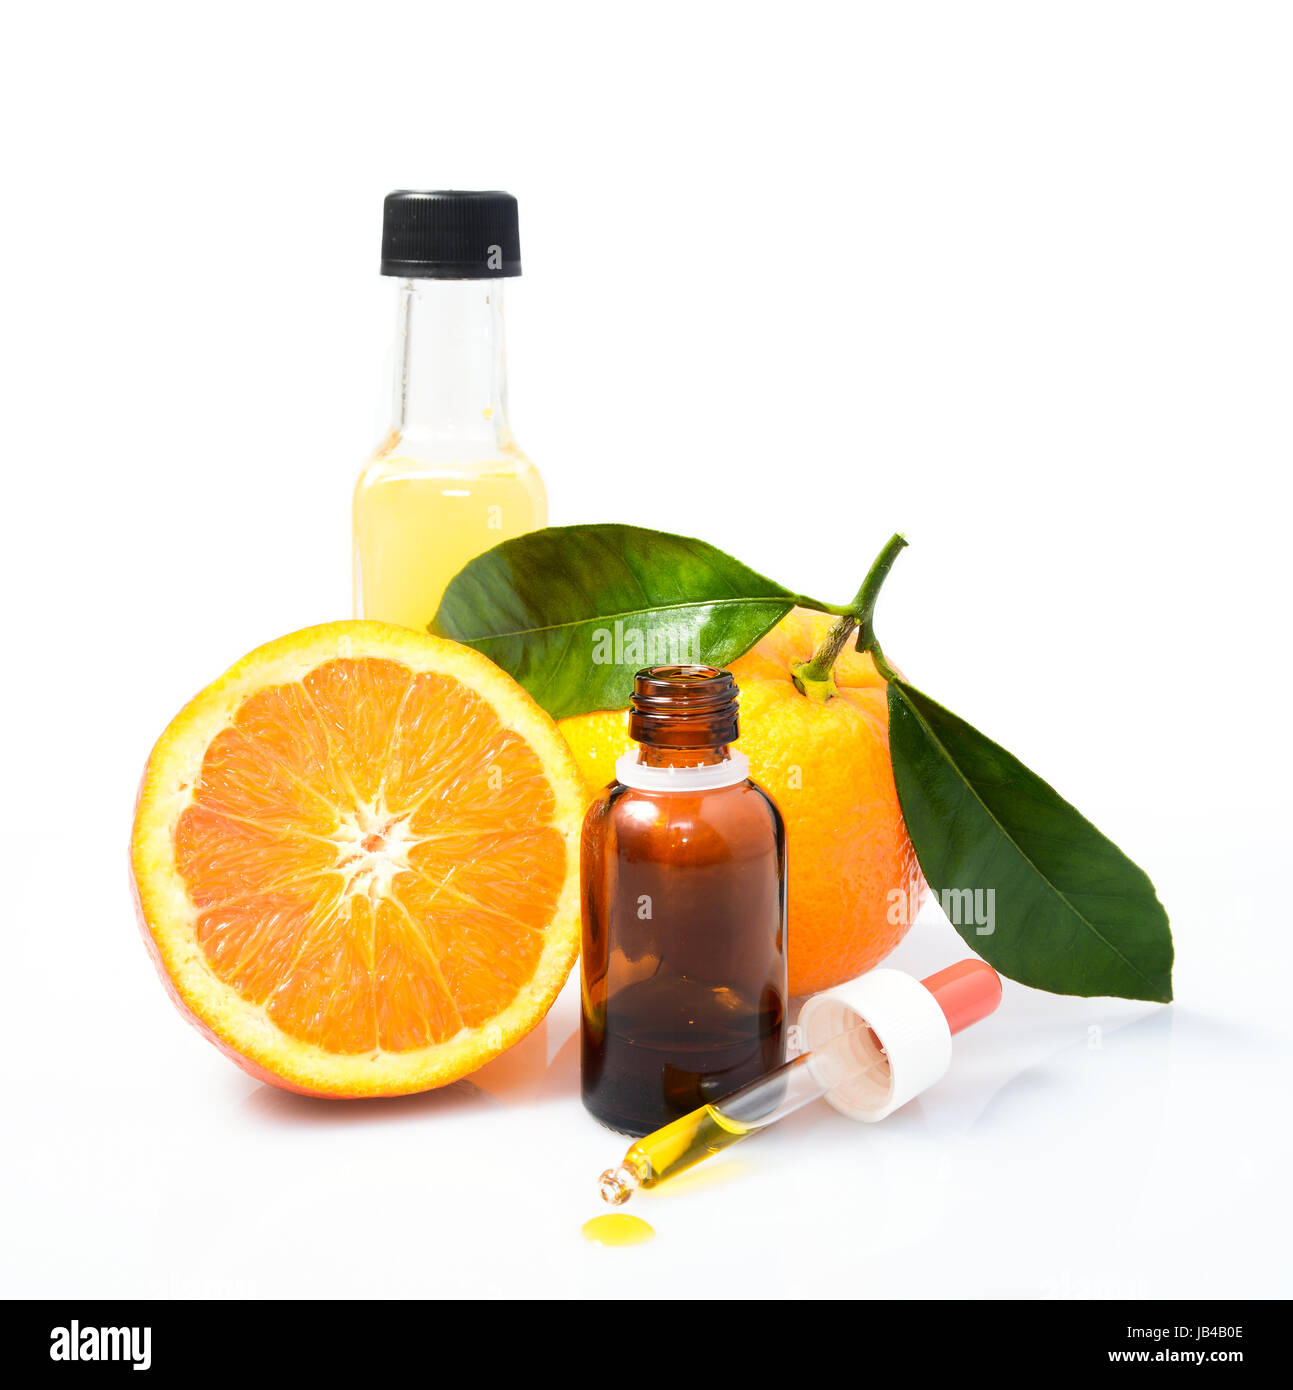 Dropper and bottle on the white background - medicine or science concept. Stock Photo